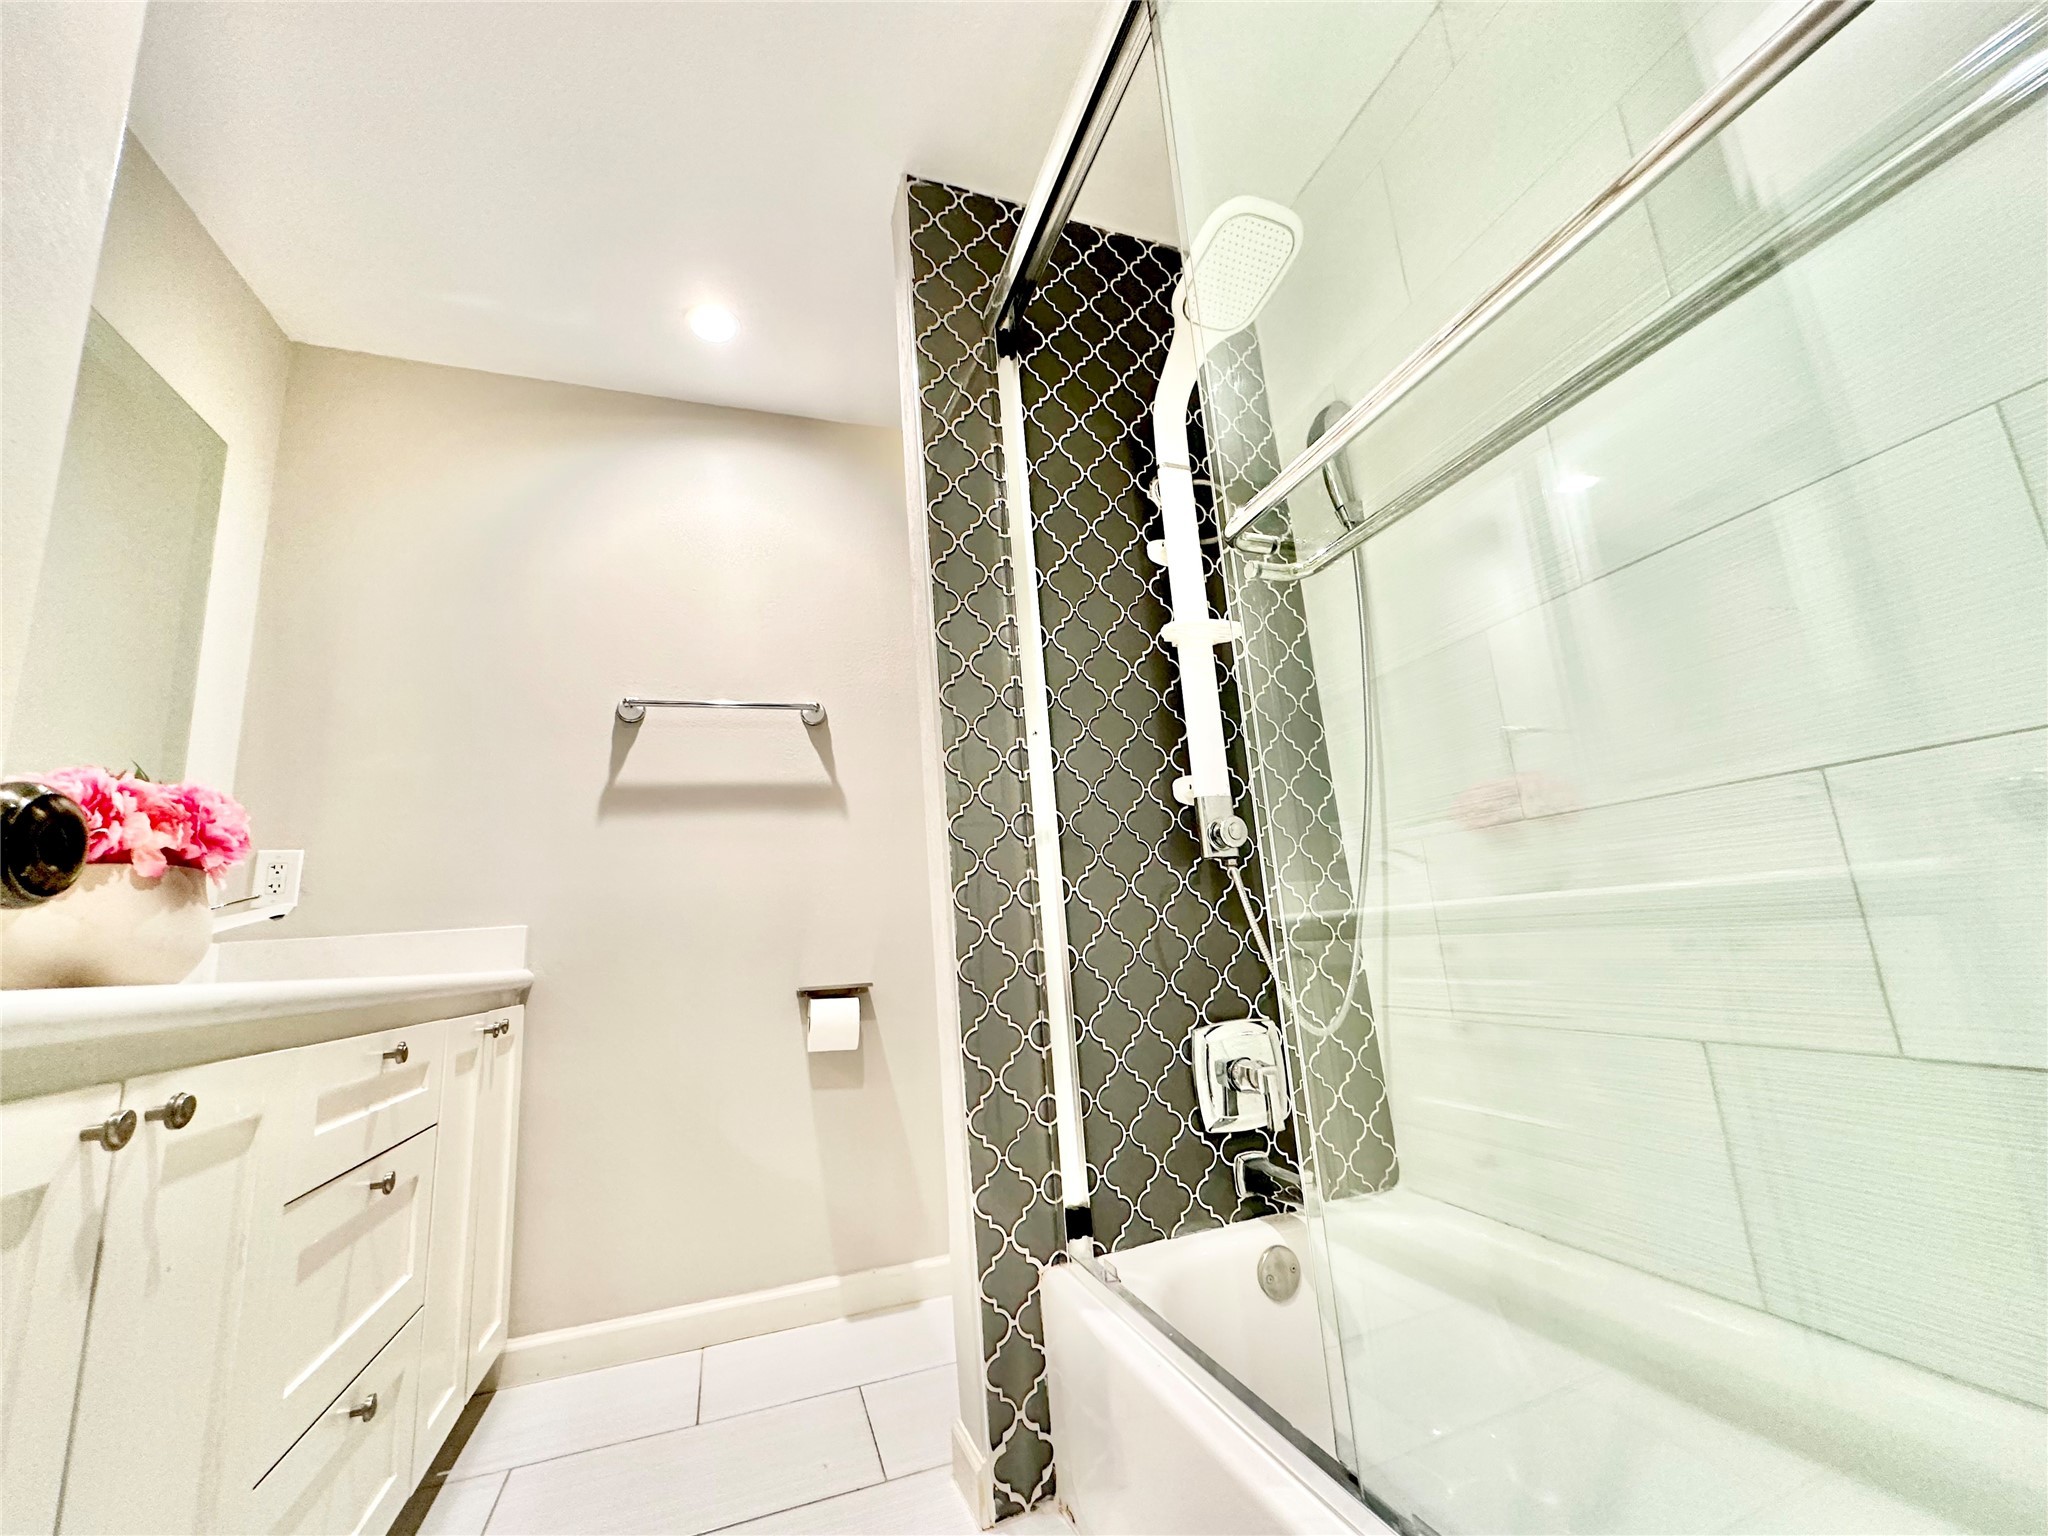 Fully remodeled hall bathroom with quartz counter, white cabinets, ceramic tile floor and a fancy contemporary shower.